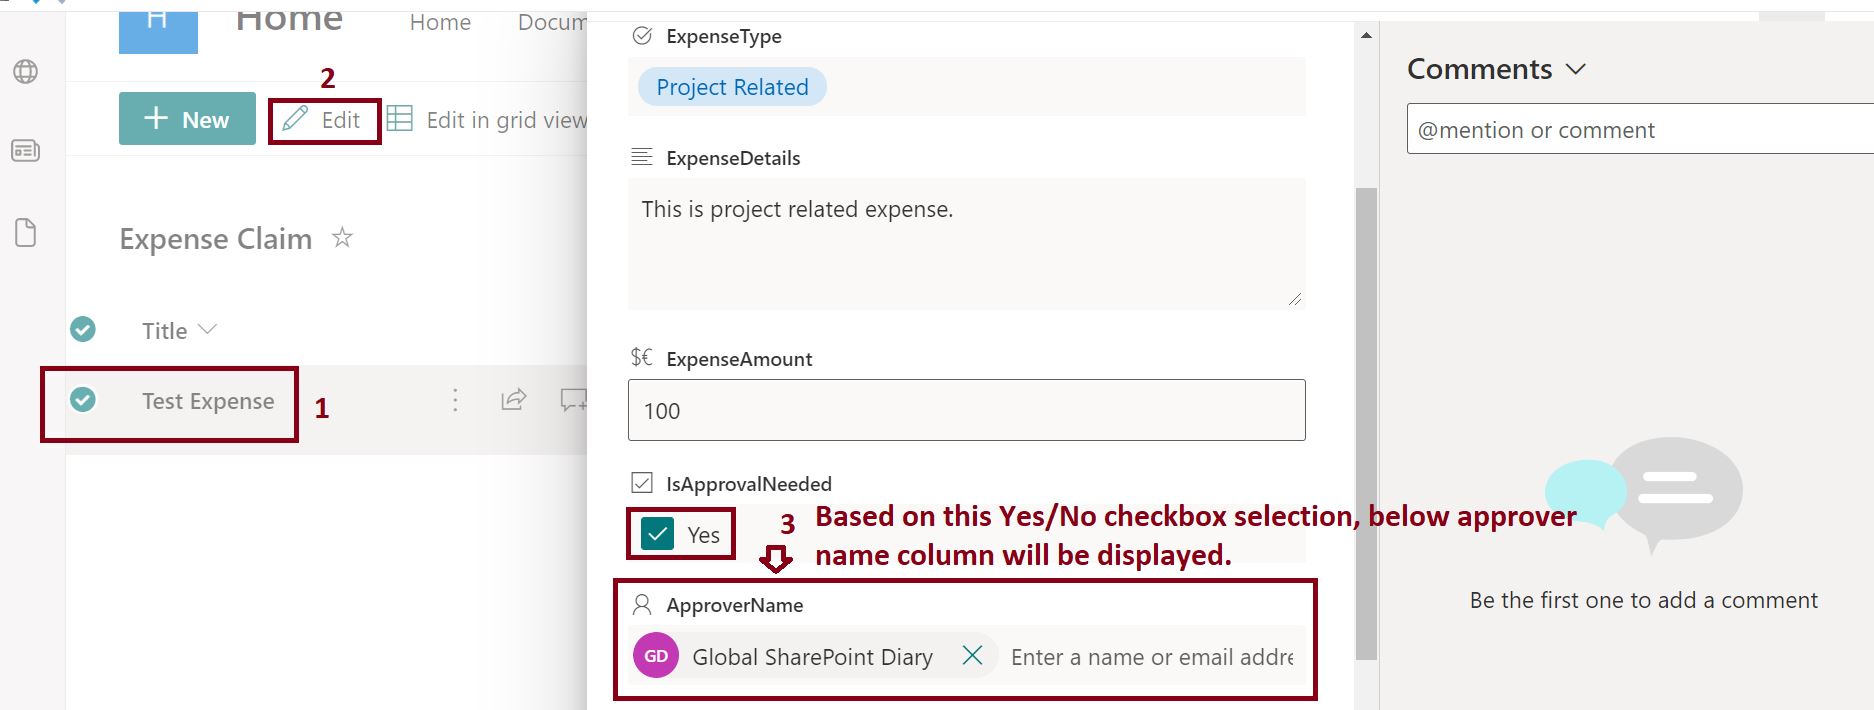 Conditionally show or hide columns in a SharePoint list, Show and hide column in SharePoint list form conditionally demo